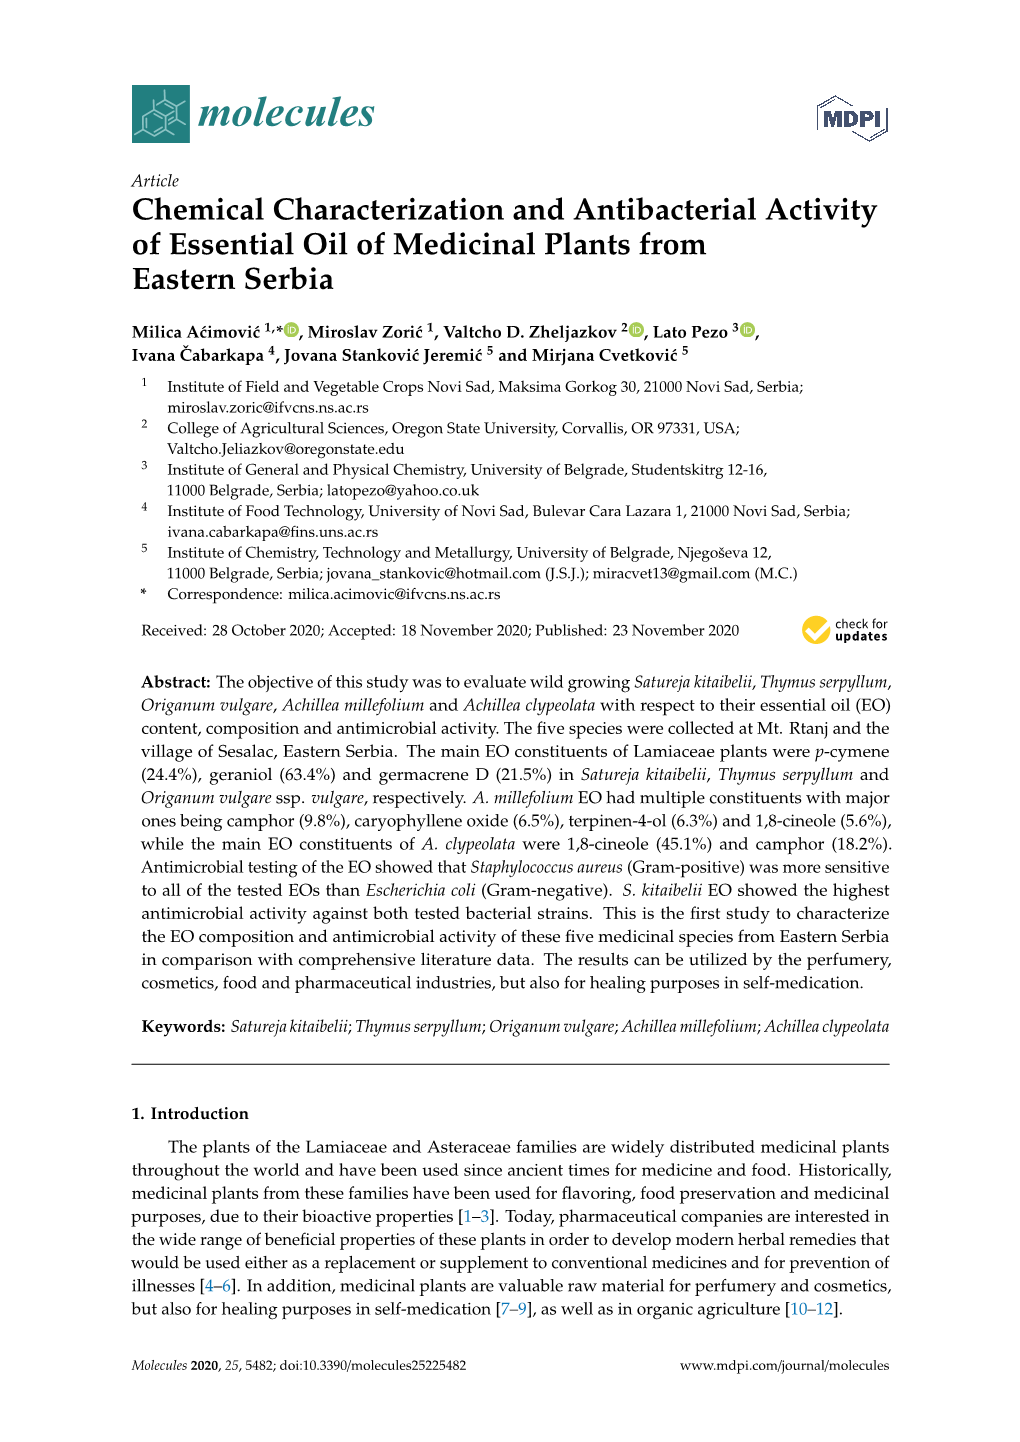 Chemical Characterization and Antibacterial Activity of Essential Oil of Medicinal Plants from Eastern Serbia